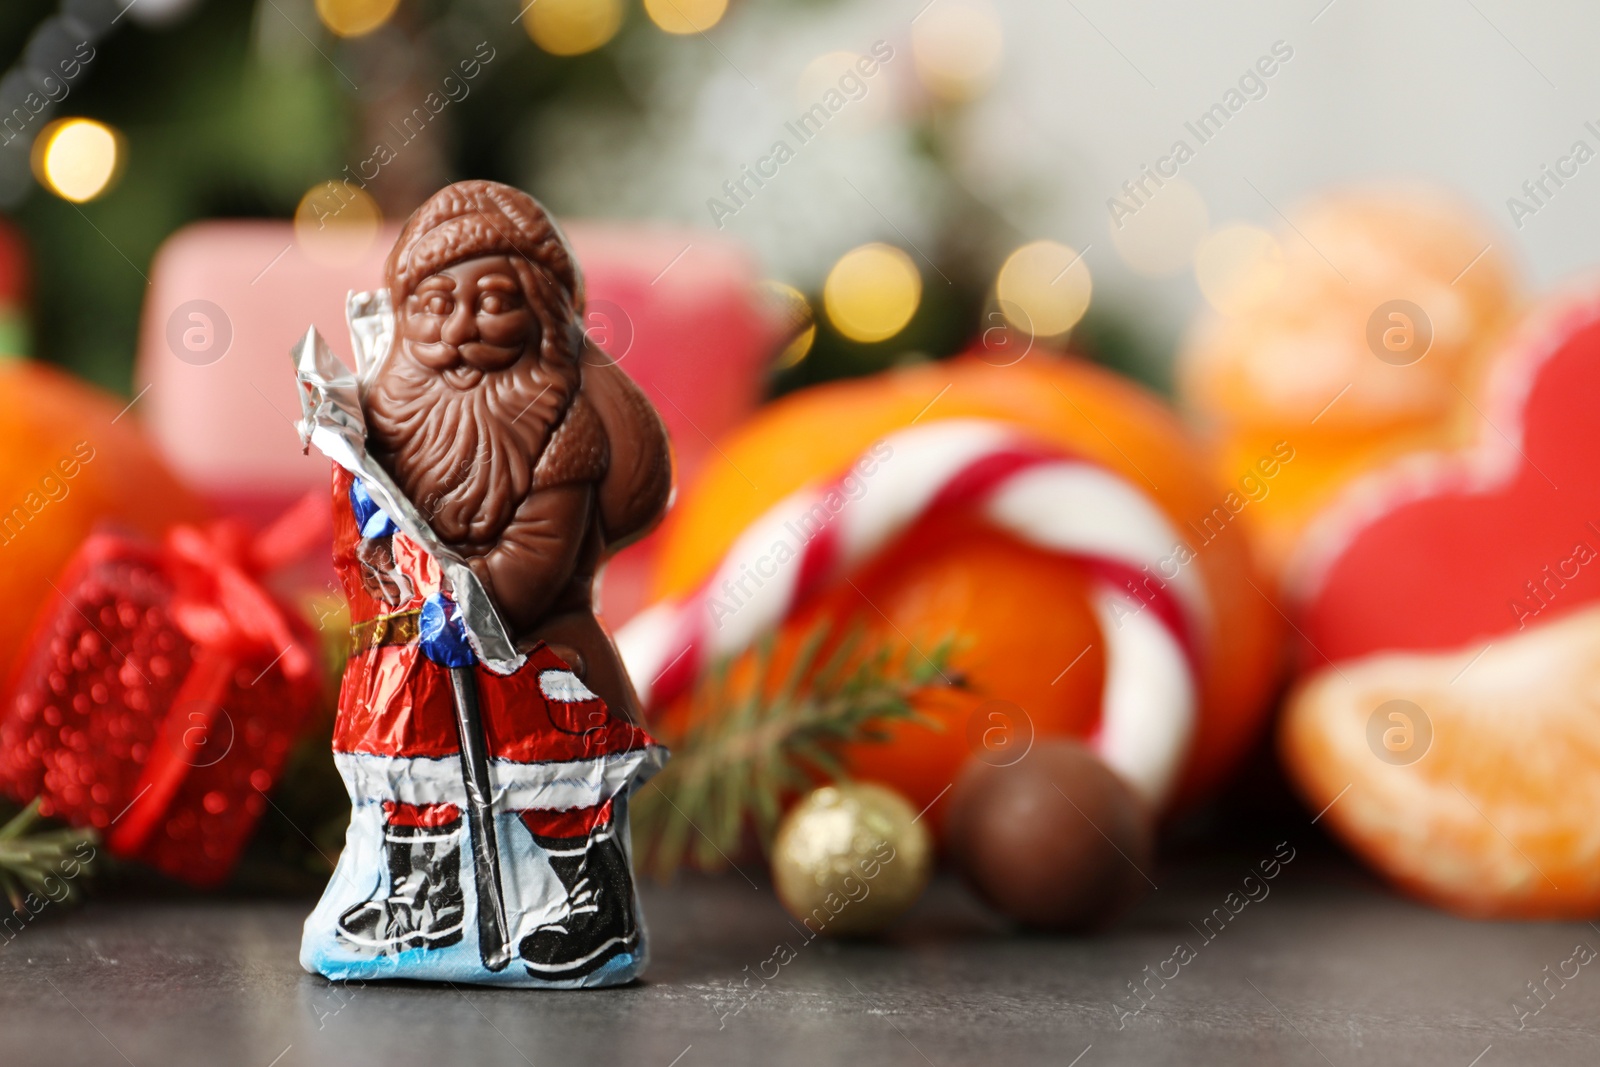 Photo of Chocolate Santa Claus candy against Christmas decorations, sweets and tangerine fruits, space for text